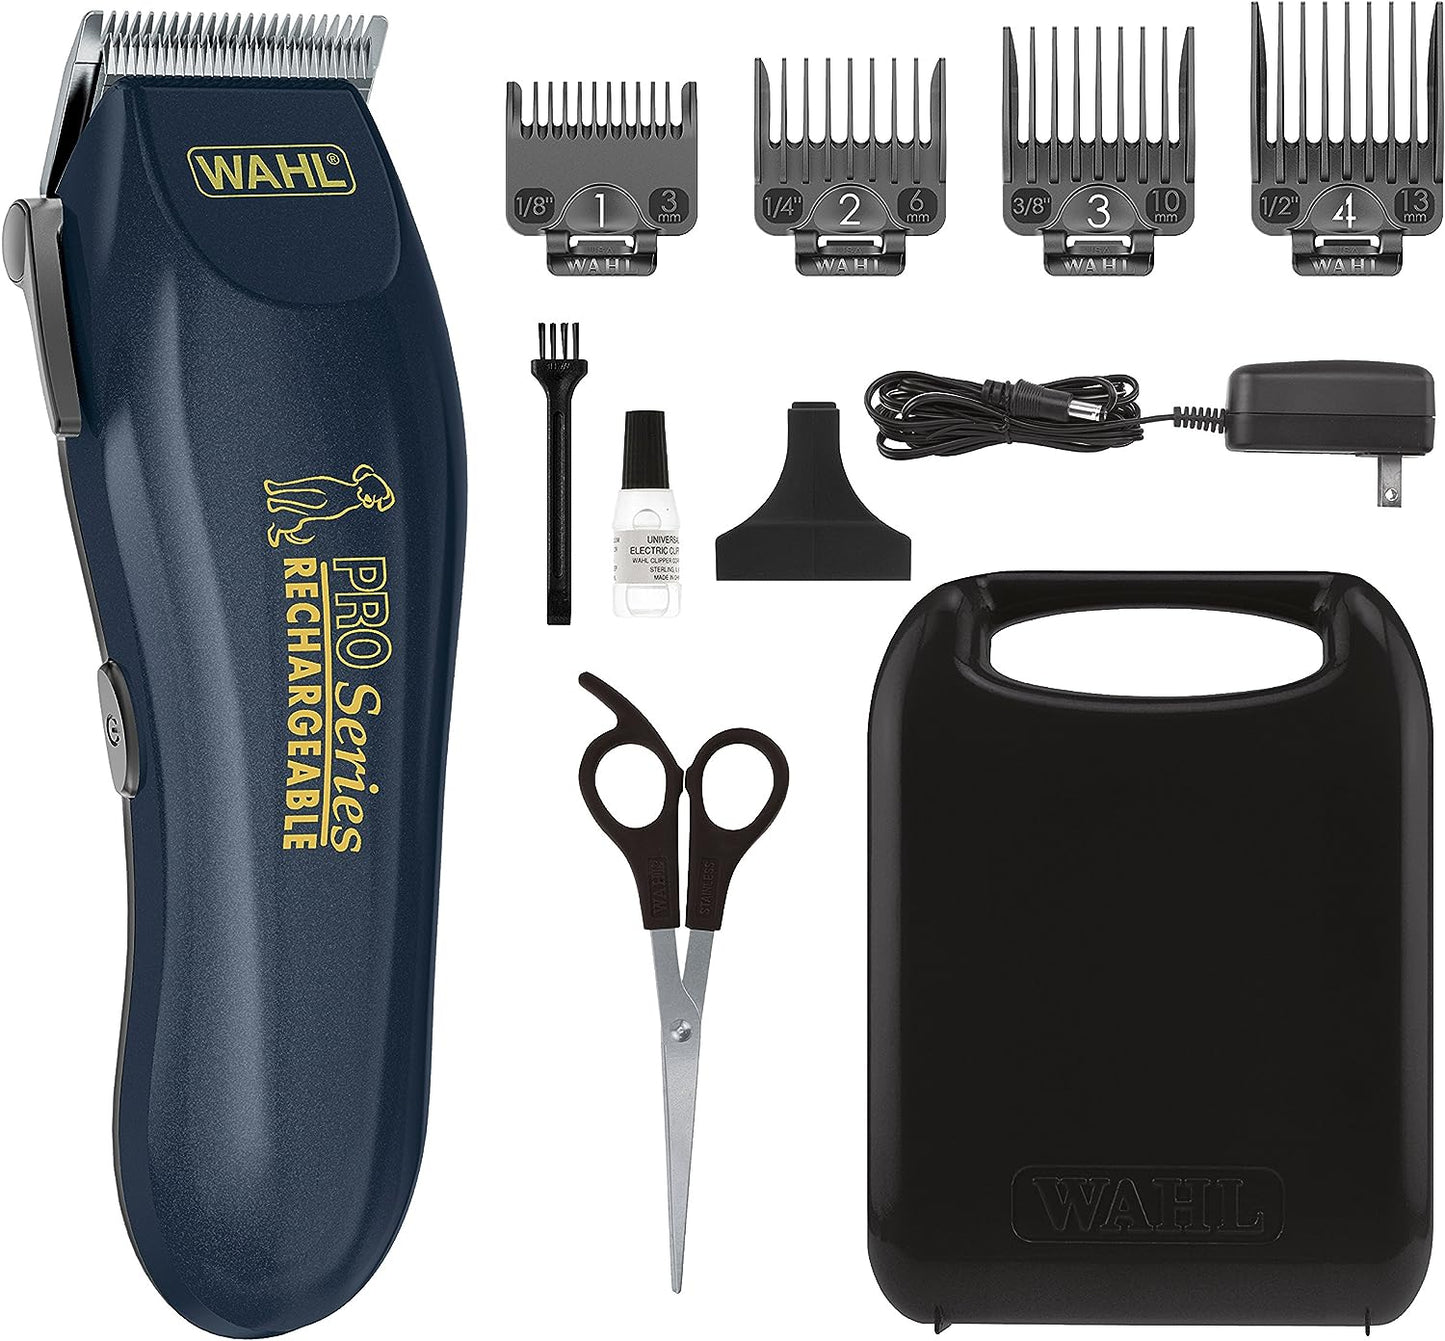 WAHL USA Deluxe Pro Series Cordless Lithium Ion Clipper Kit for Dog Grooming at Home with Heavy Duty Motor, Self-Sharpening Blades, and 2 Hour Run Time – Model 9591-2100